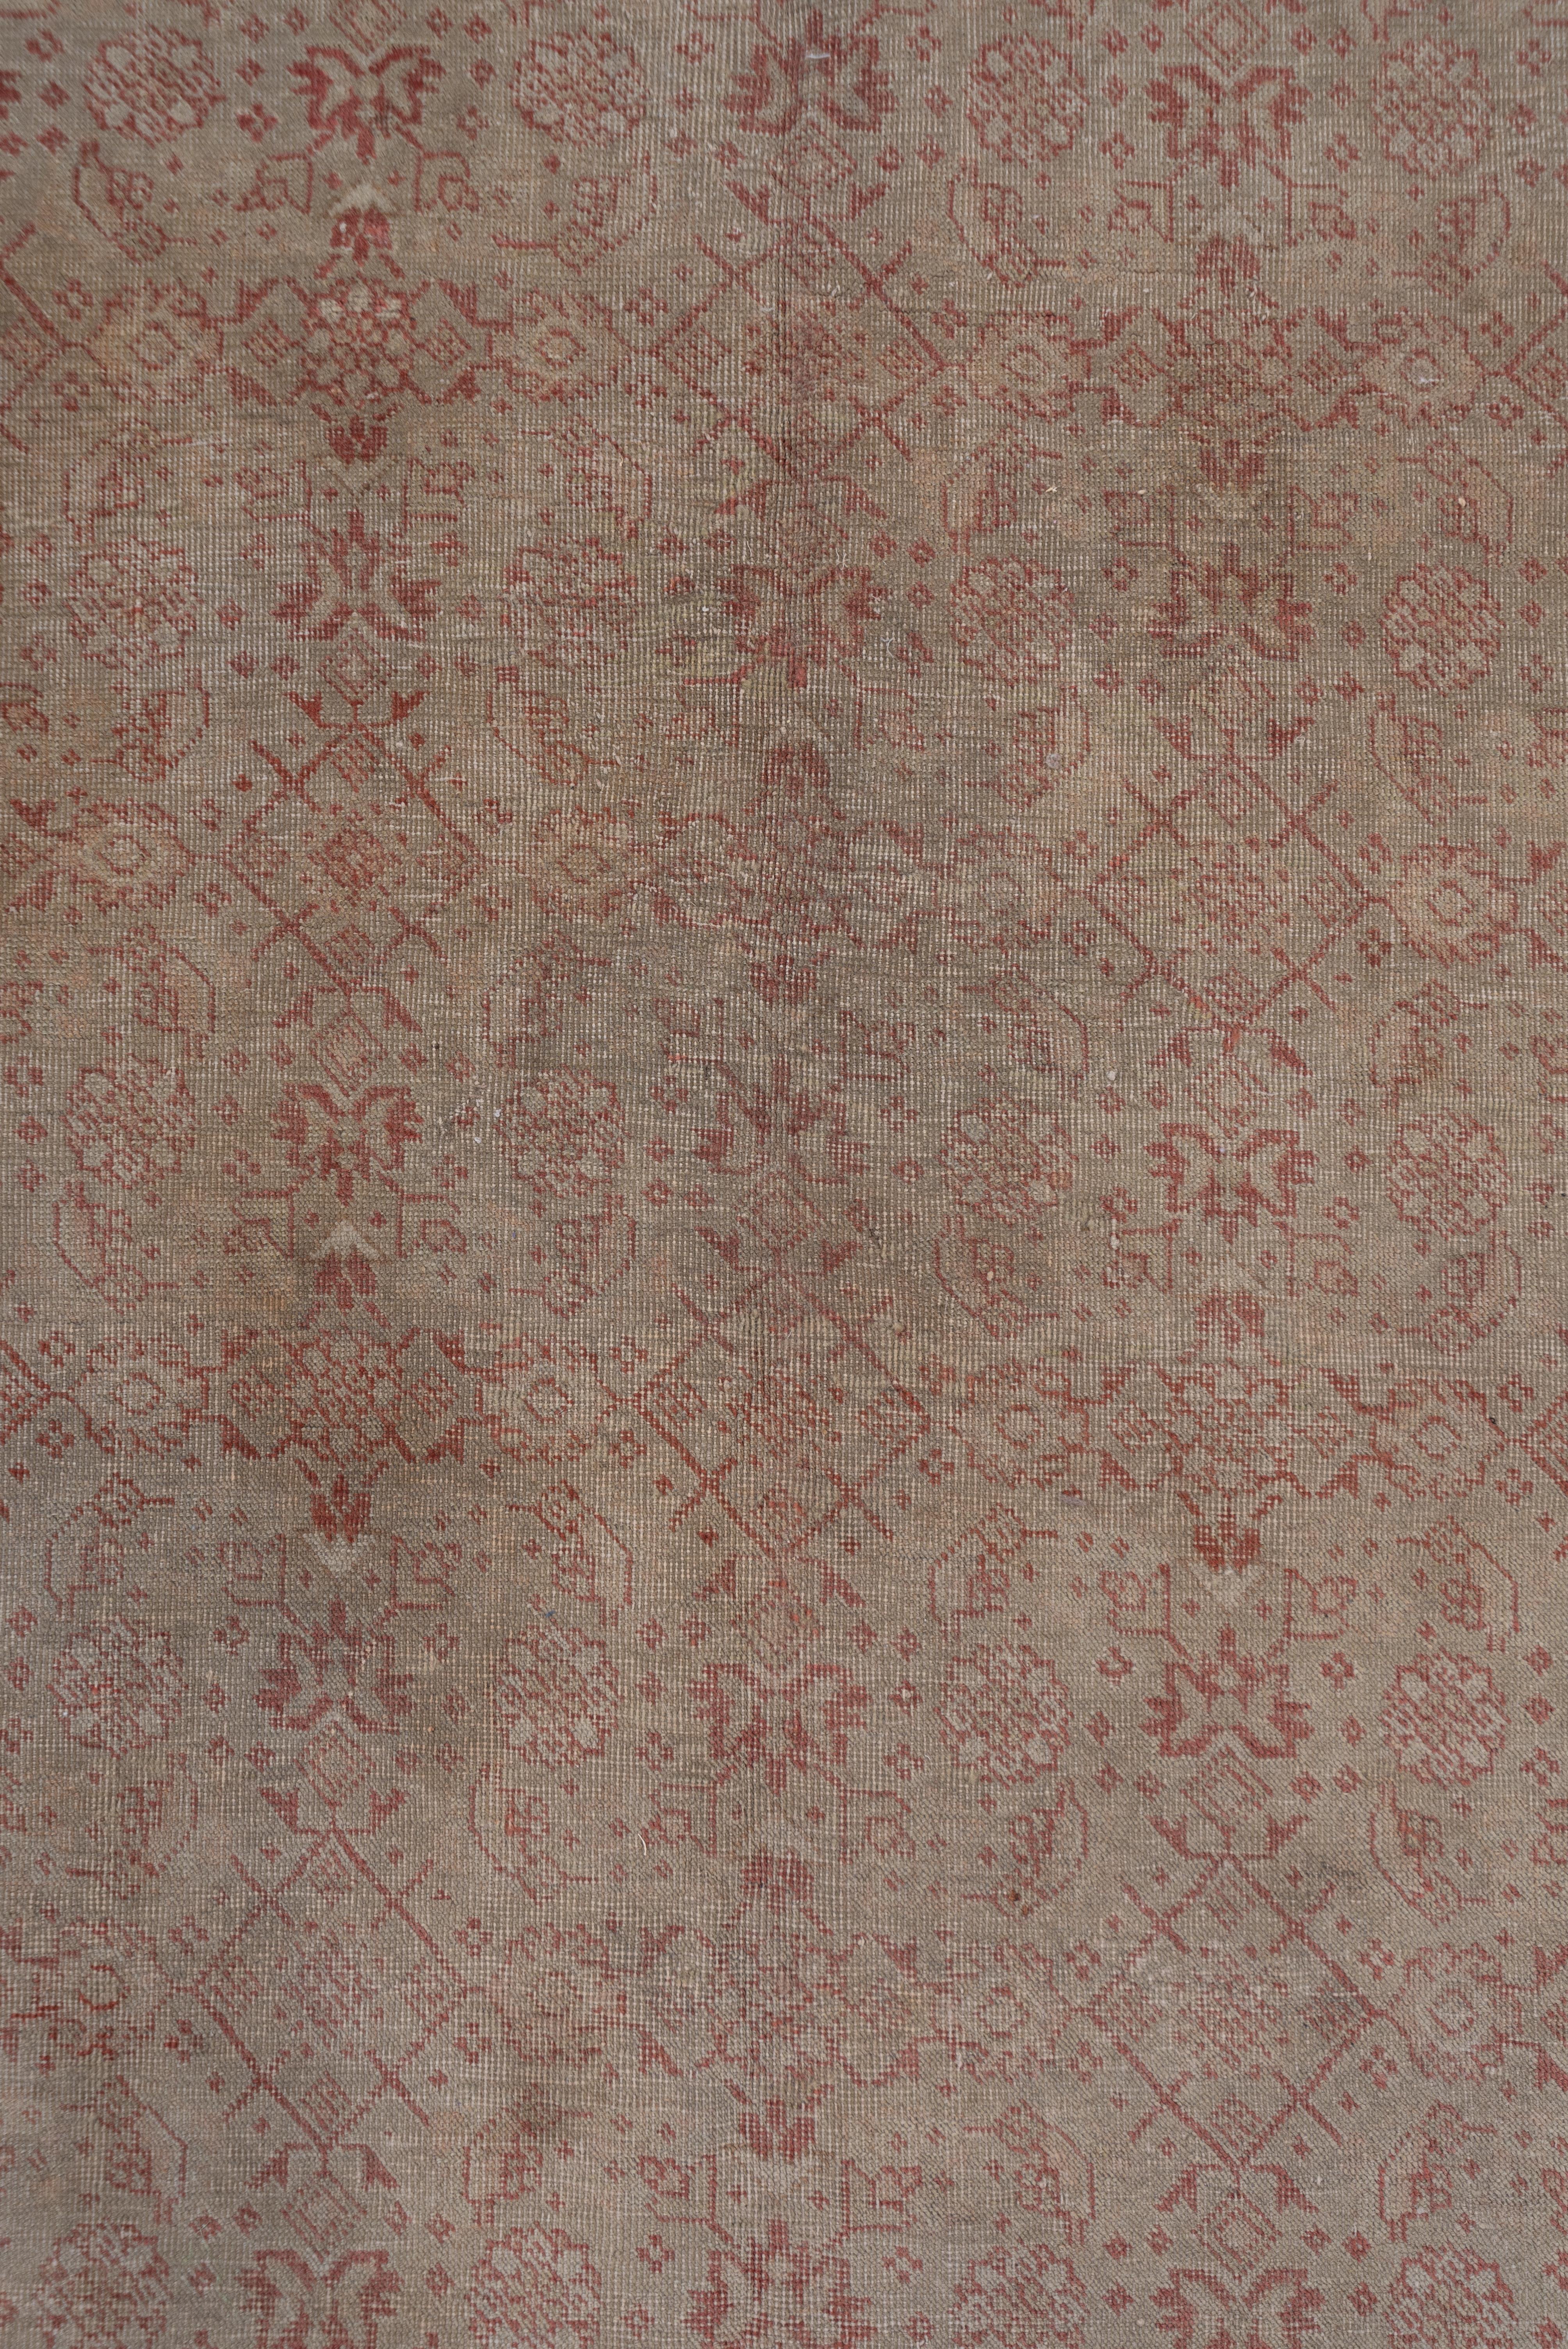 The beige field is closely covered by a small scale all-over Herati pattern set within a border system including two ivory minors with pentagonal whole flower patterns and a broader rust main with oval palmettes joined by an acanthus strapwork. The